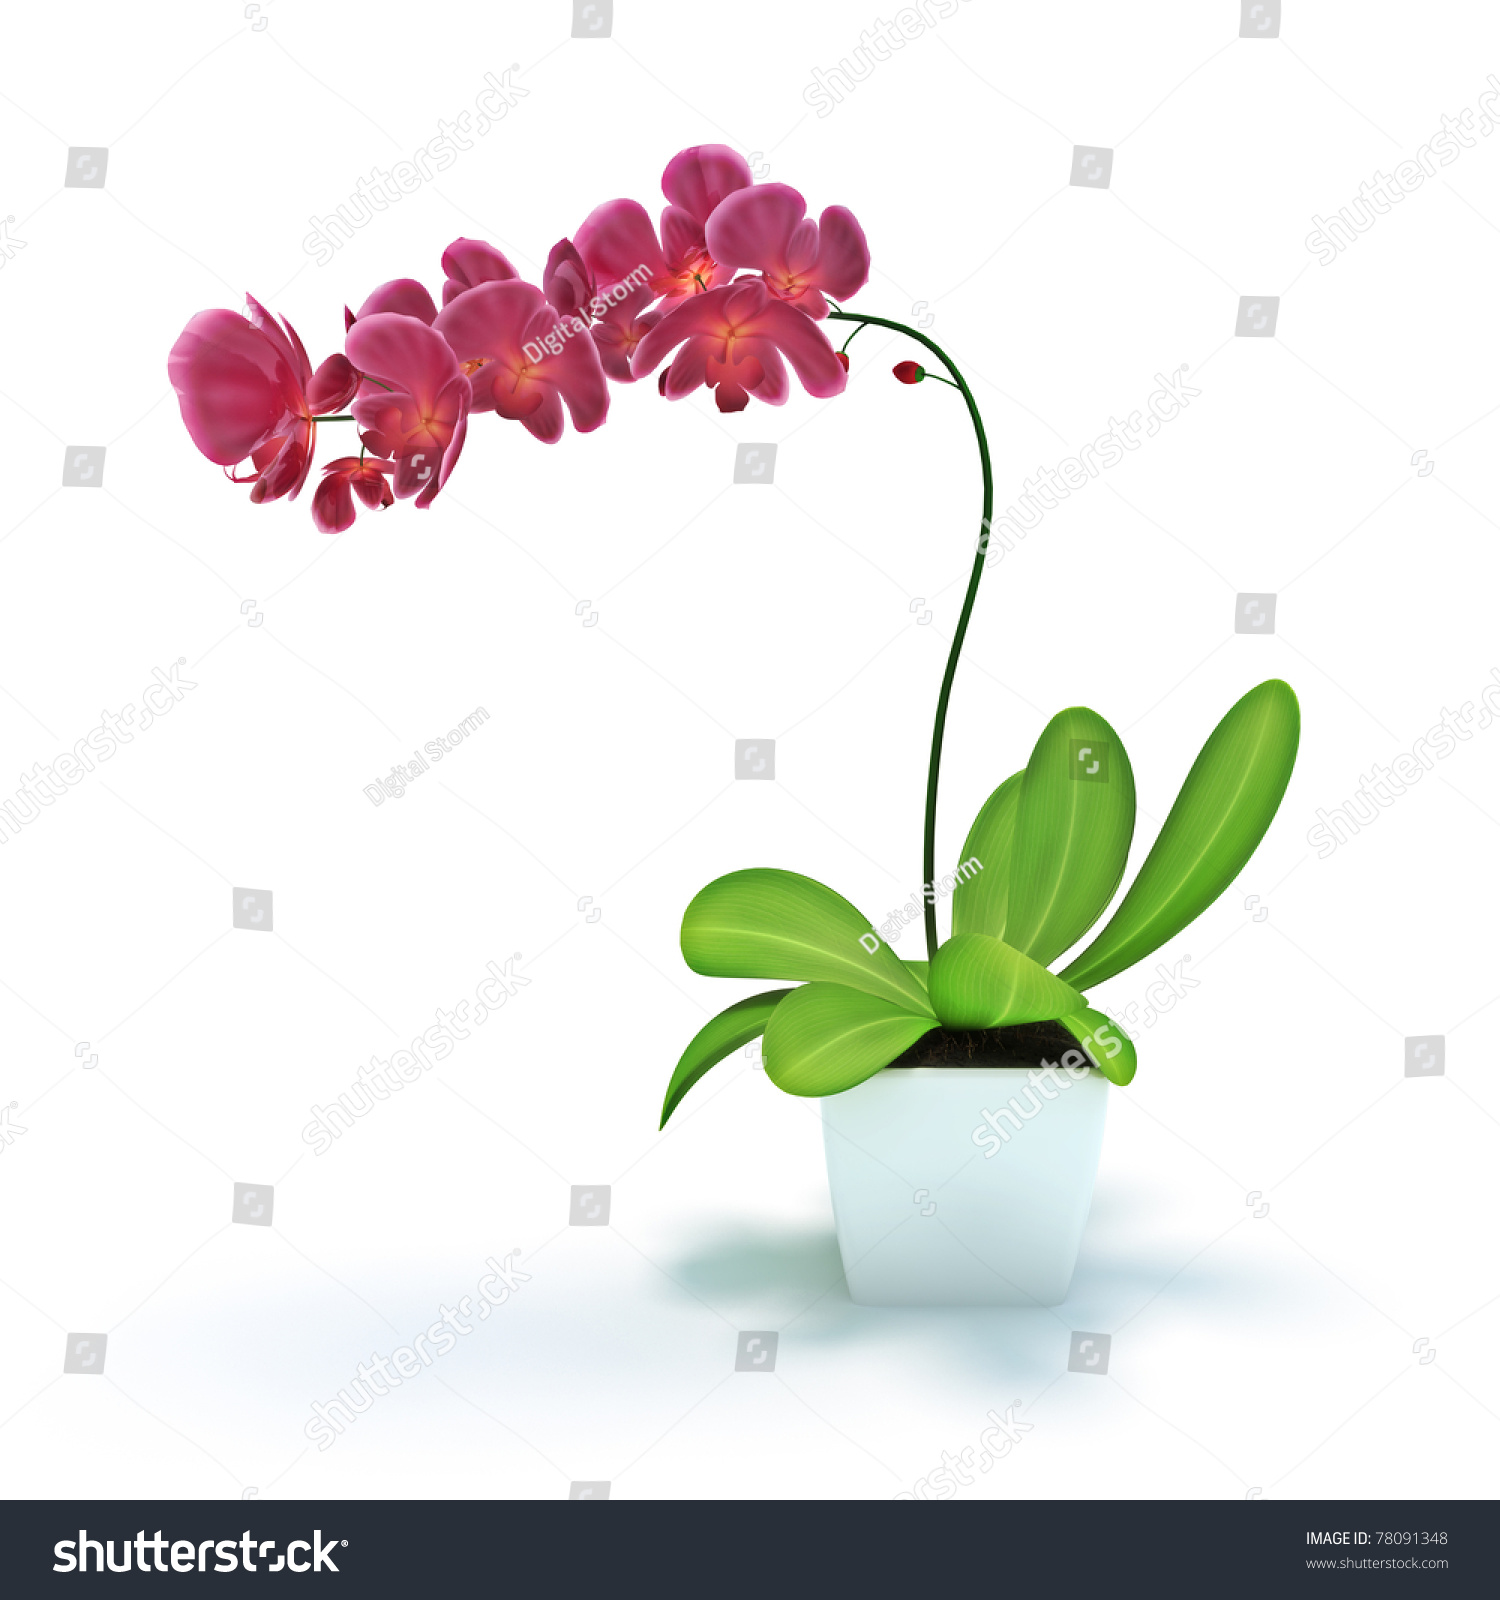 Plant With Flowers Isolated On A White Background. 300 D.P.I Stock